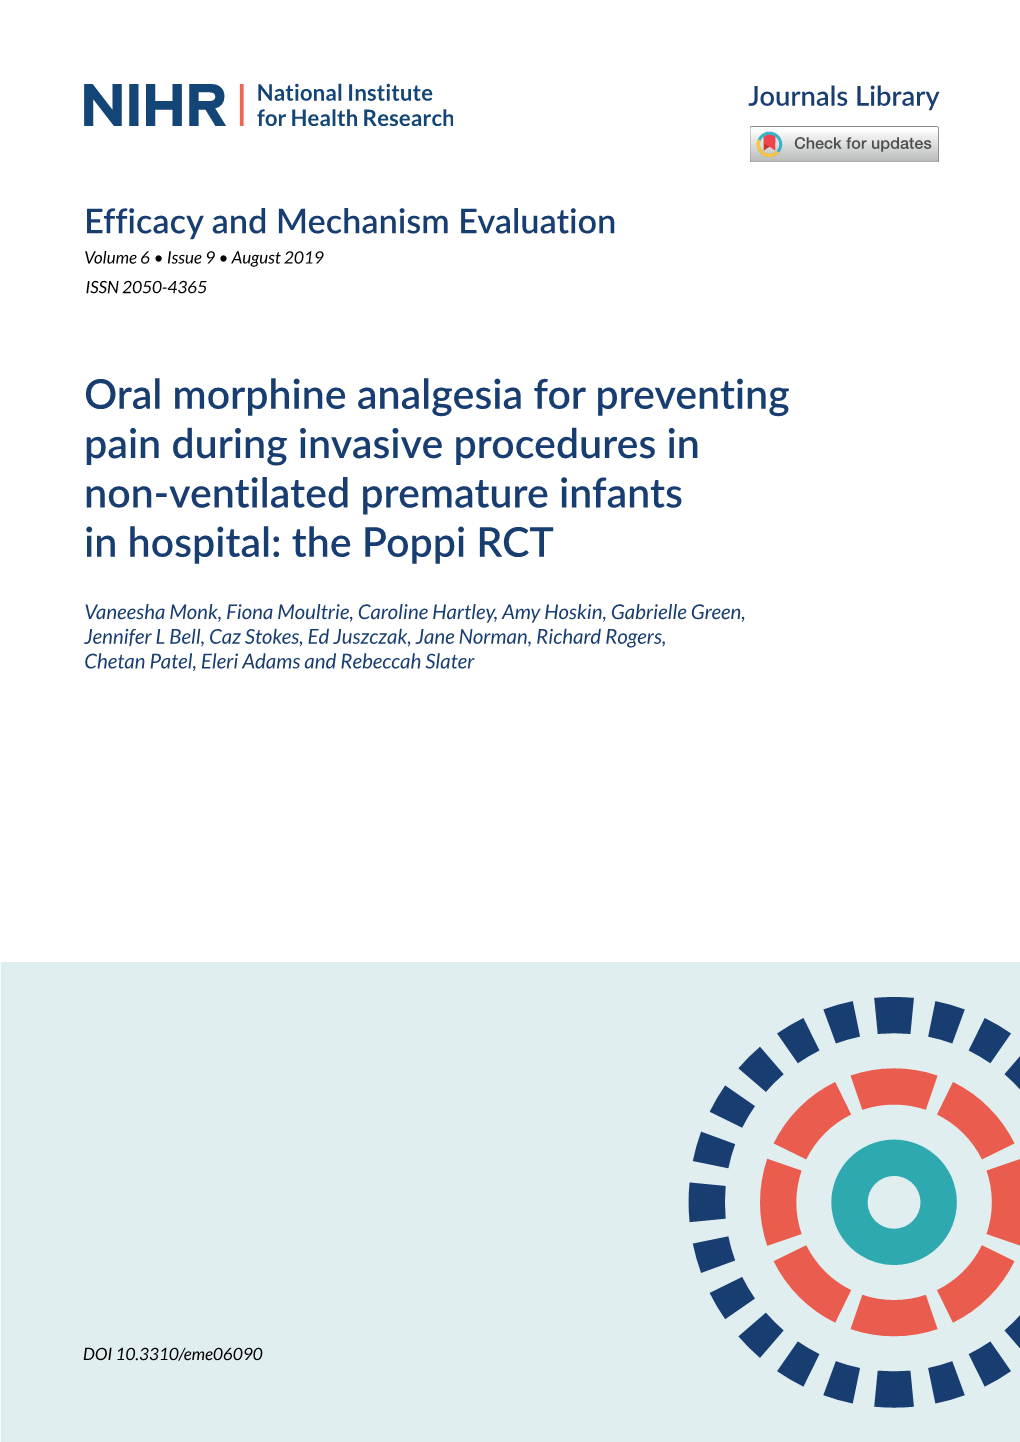 Oral Morphine Analgesia for Preventing Pain During Invasive Procedures in Non-Ventilated Premature Infants in Hospital: the Poppi RCT